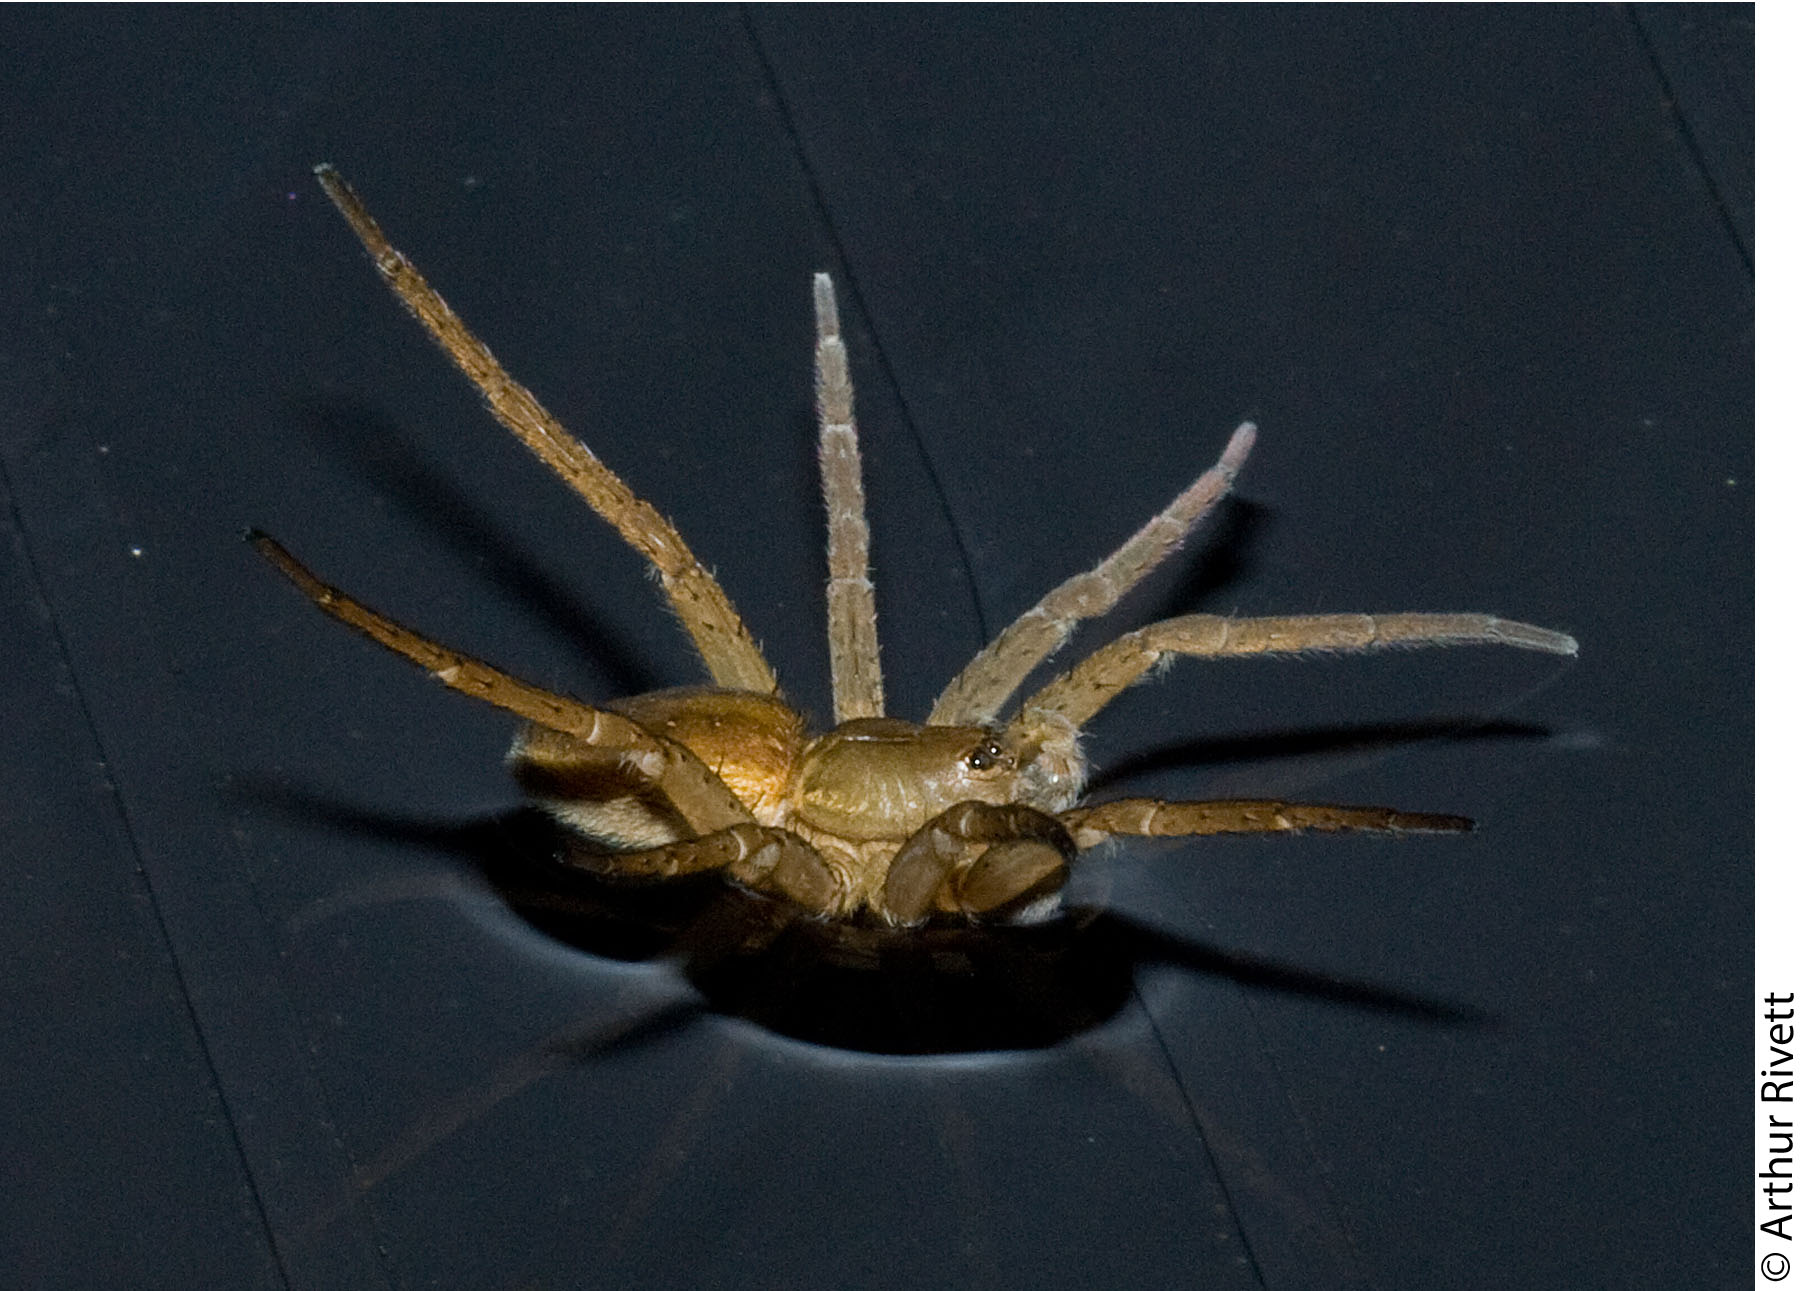 Dolomedes plantarius sailing by raising all of its legs!